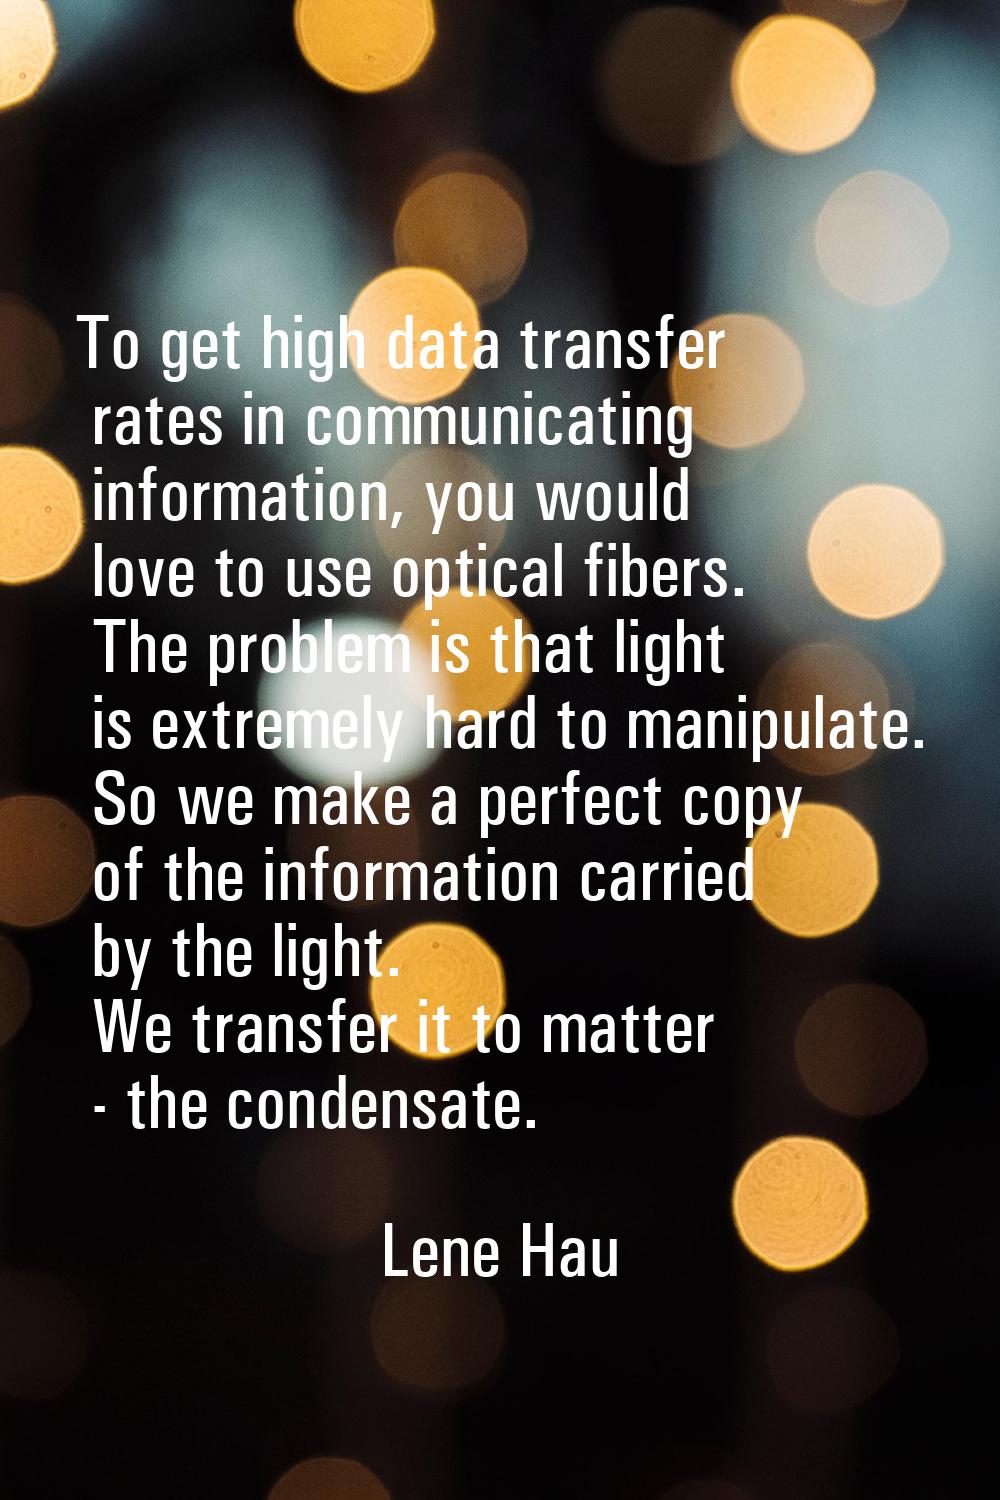 To get high data transfer rates in communicating information, you would love to use optical fibers.